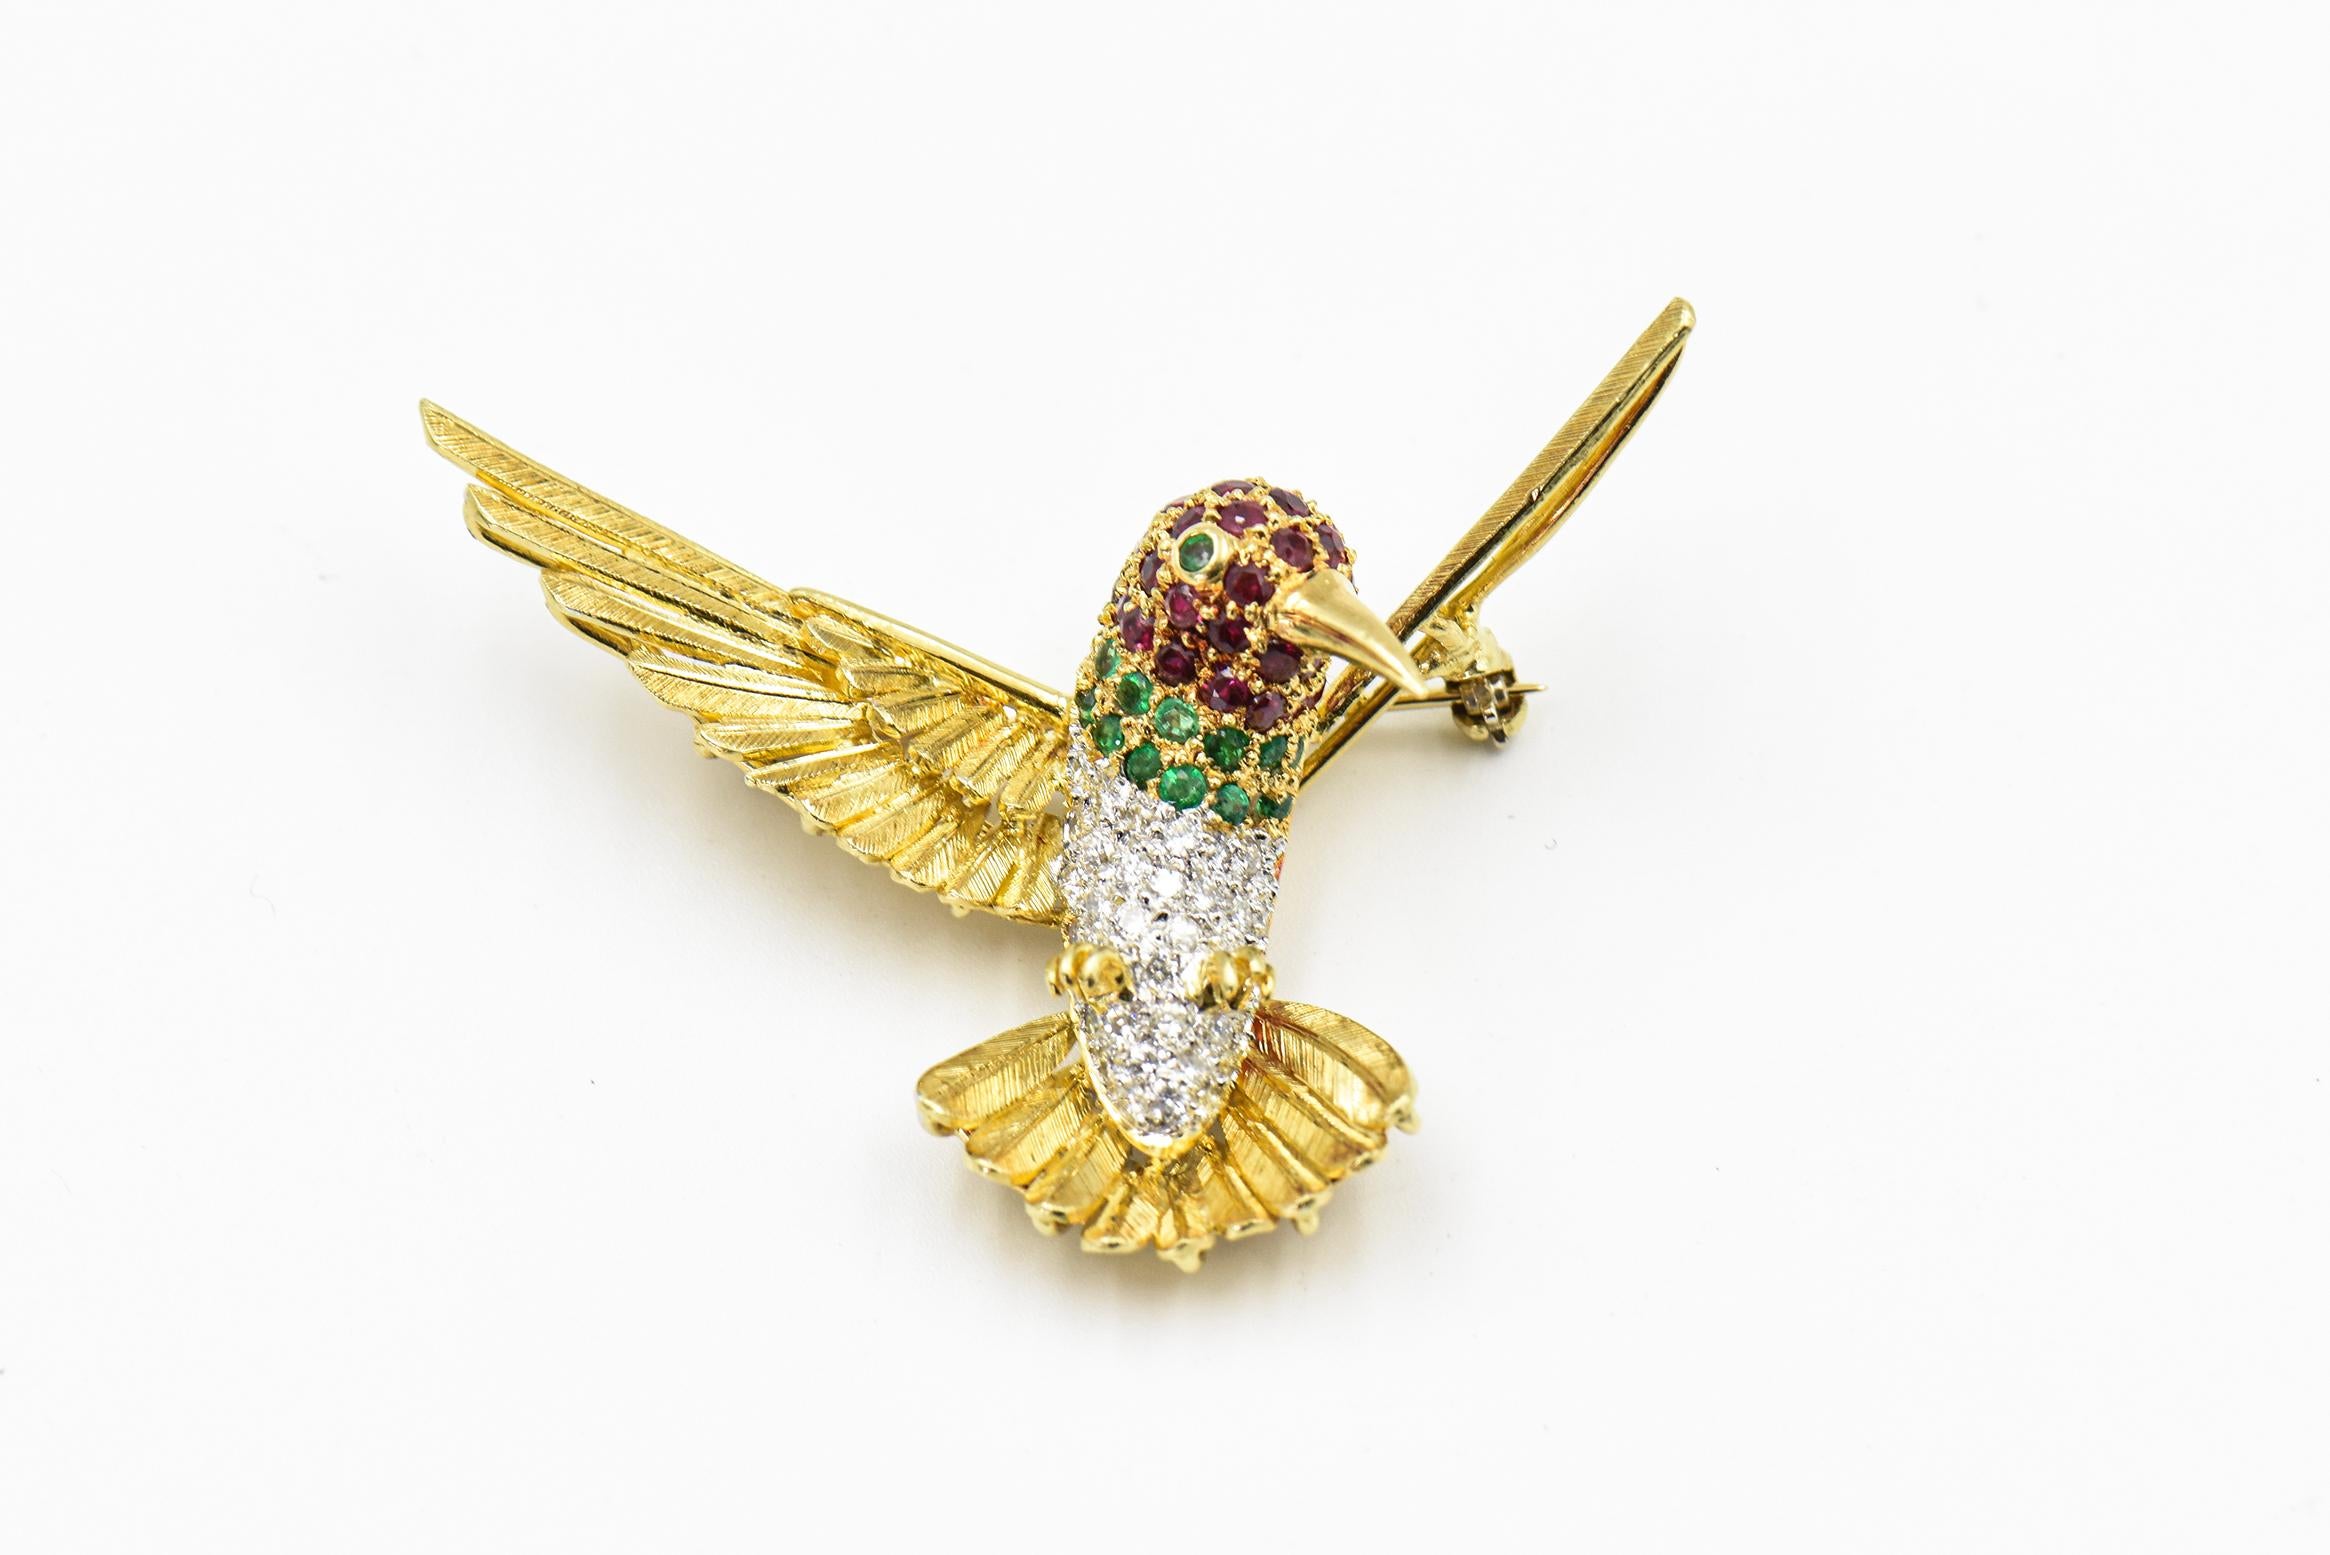 Finely made 18k yellow gold hummingbird brooch featuring etched wings with a diamond body, ruby head and emerald collar and eye.  This brooch is marked 750.  I believe it was made in Italy in 1960 or 1970s.